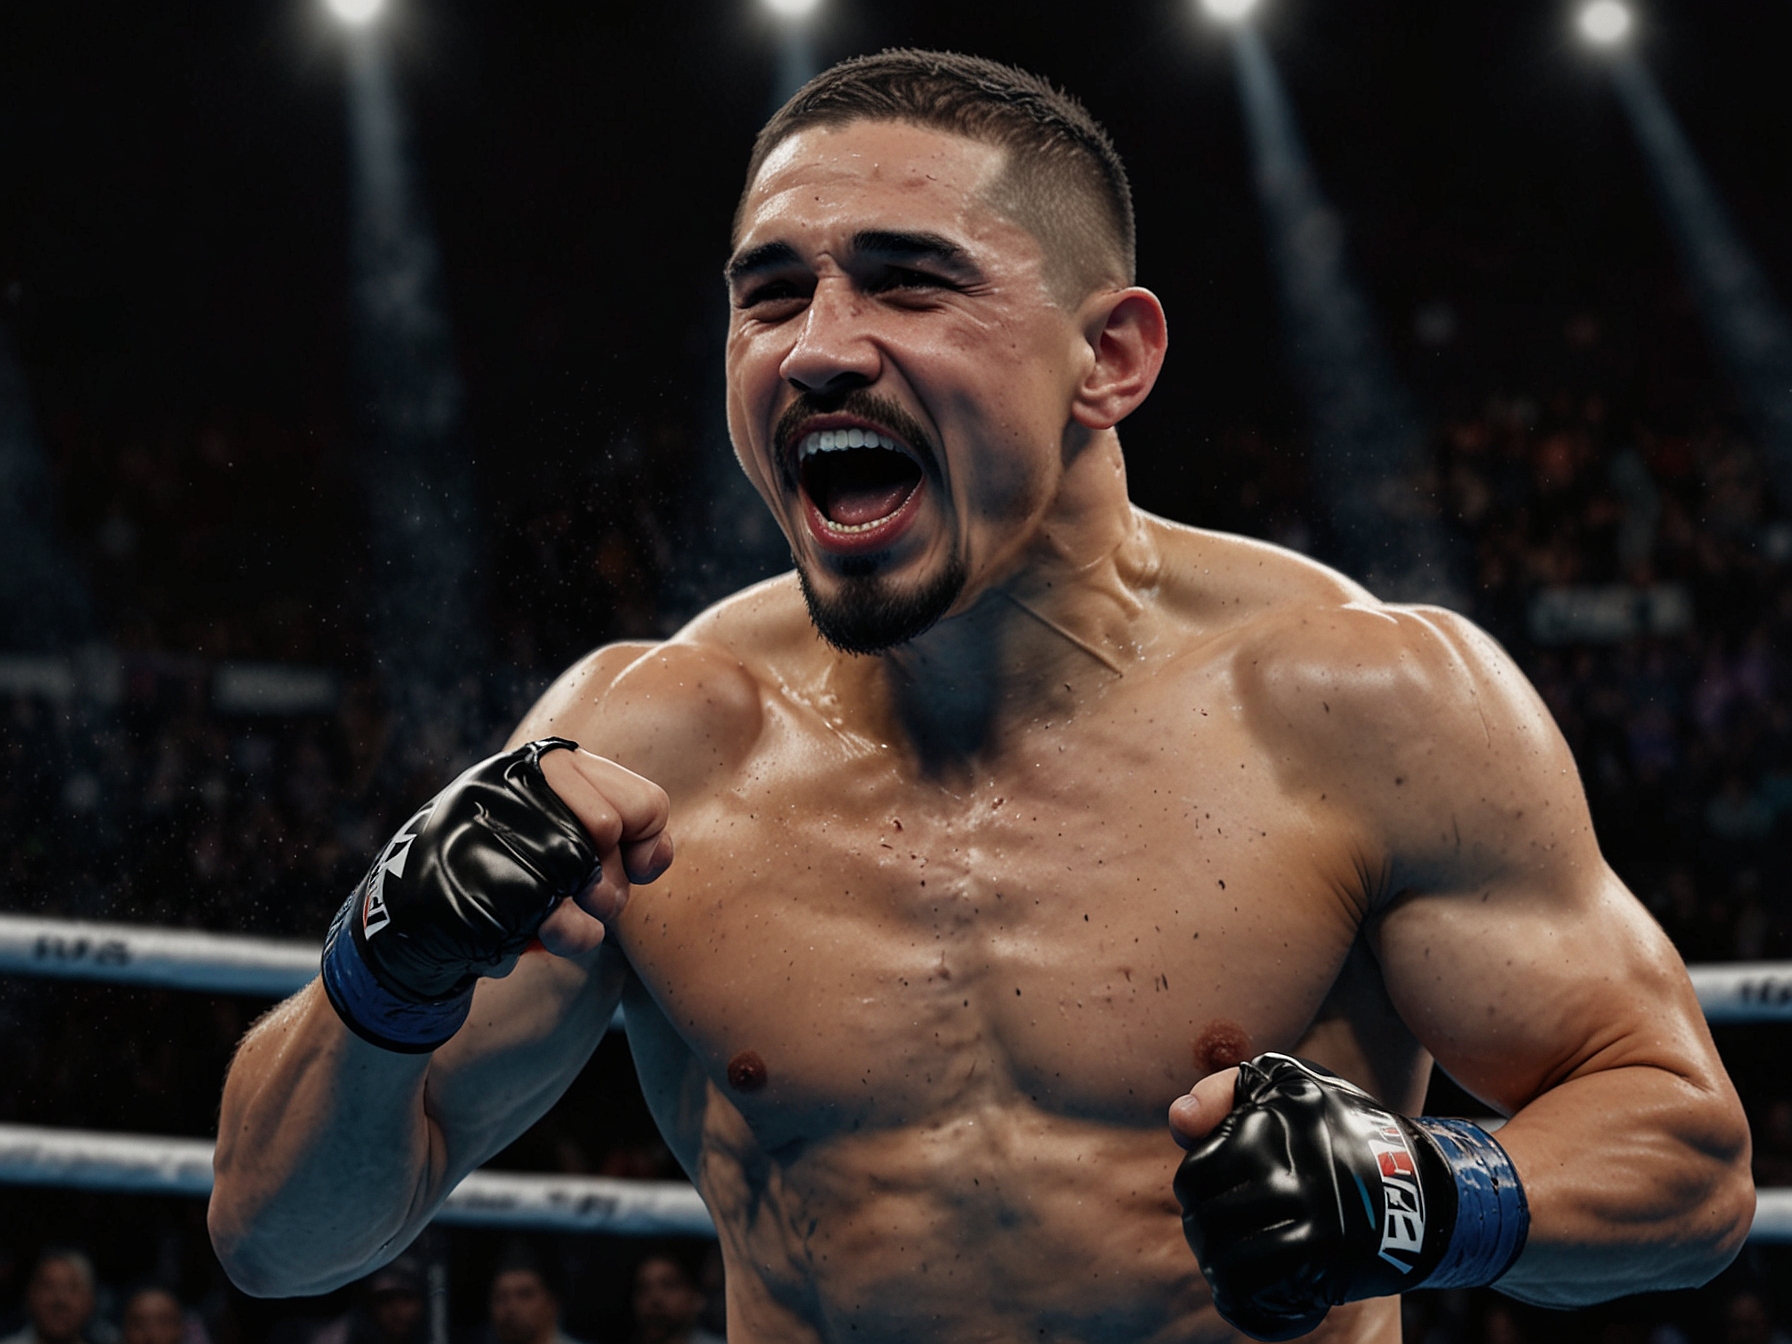 Robert Whittaker celebrates his victory with a powerful round 1 knockout, demonstrating his formidable skills and setting the stage for a much-anticipated showdown with Chimaev.